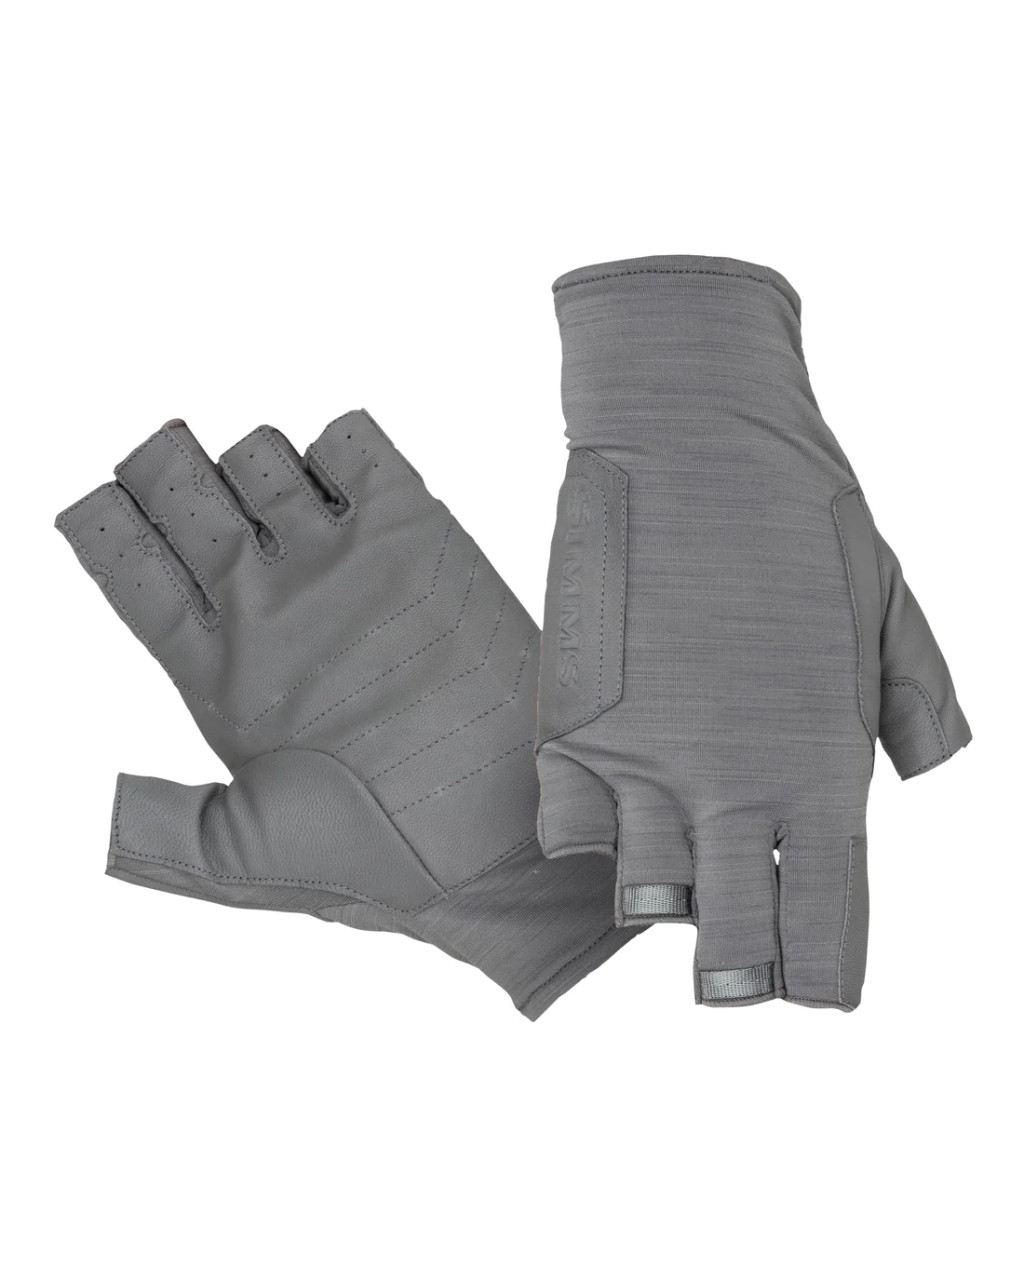 https://cdn11.bigcommerce.com/s-a9s171pbr5/images/stencil/1280x1280/products/3800/8217/13474-041-solarflex-guide-glove-sterling_s22-001-front_1100x__18563.1690917971.jpg?c=1